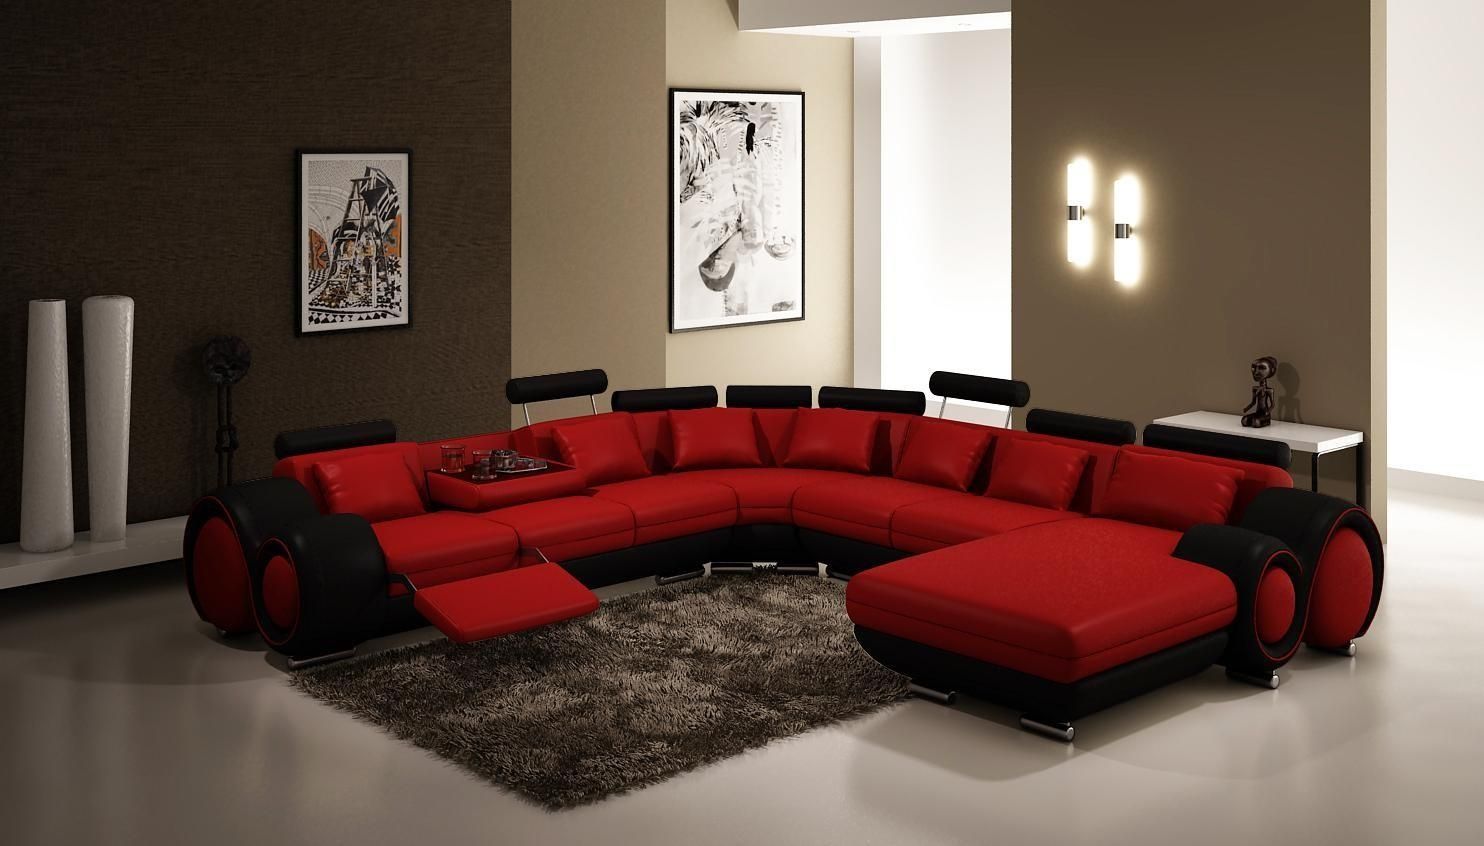 Furniture 4084 Contemporary Red And Black Sectional Sofa Throughout Red Black Sectional Sofa (View 9 of 20)